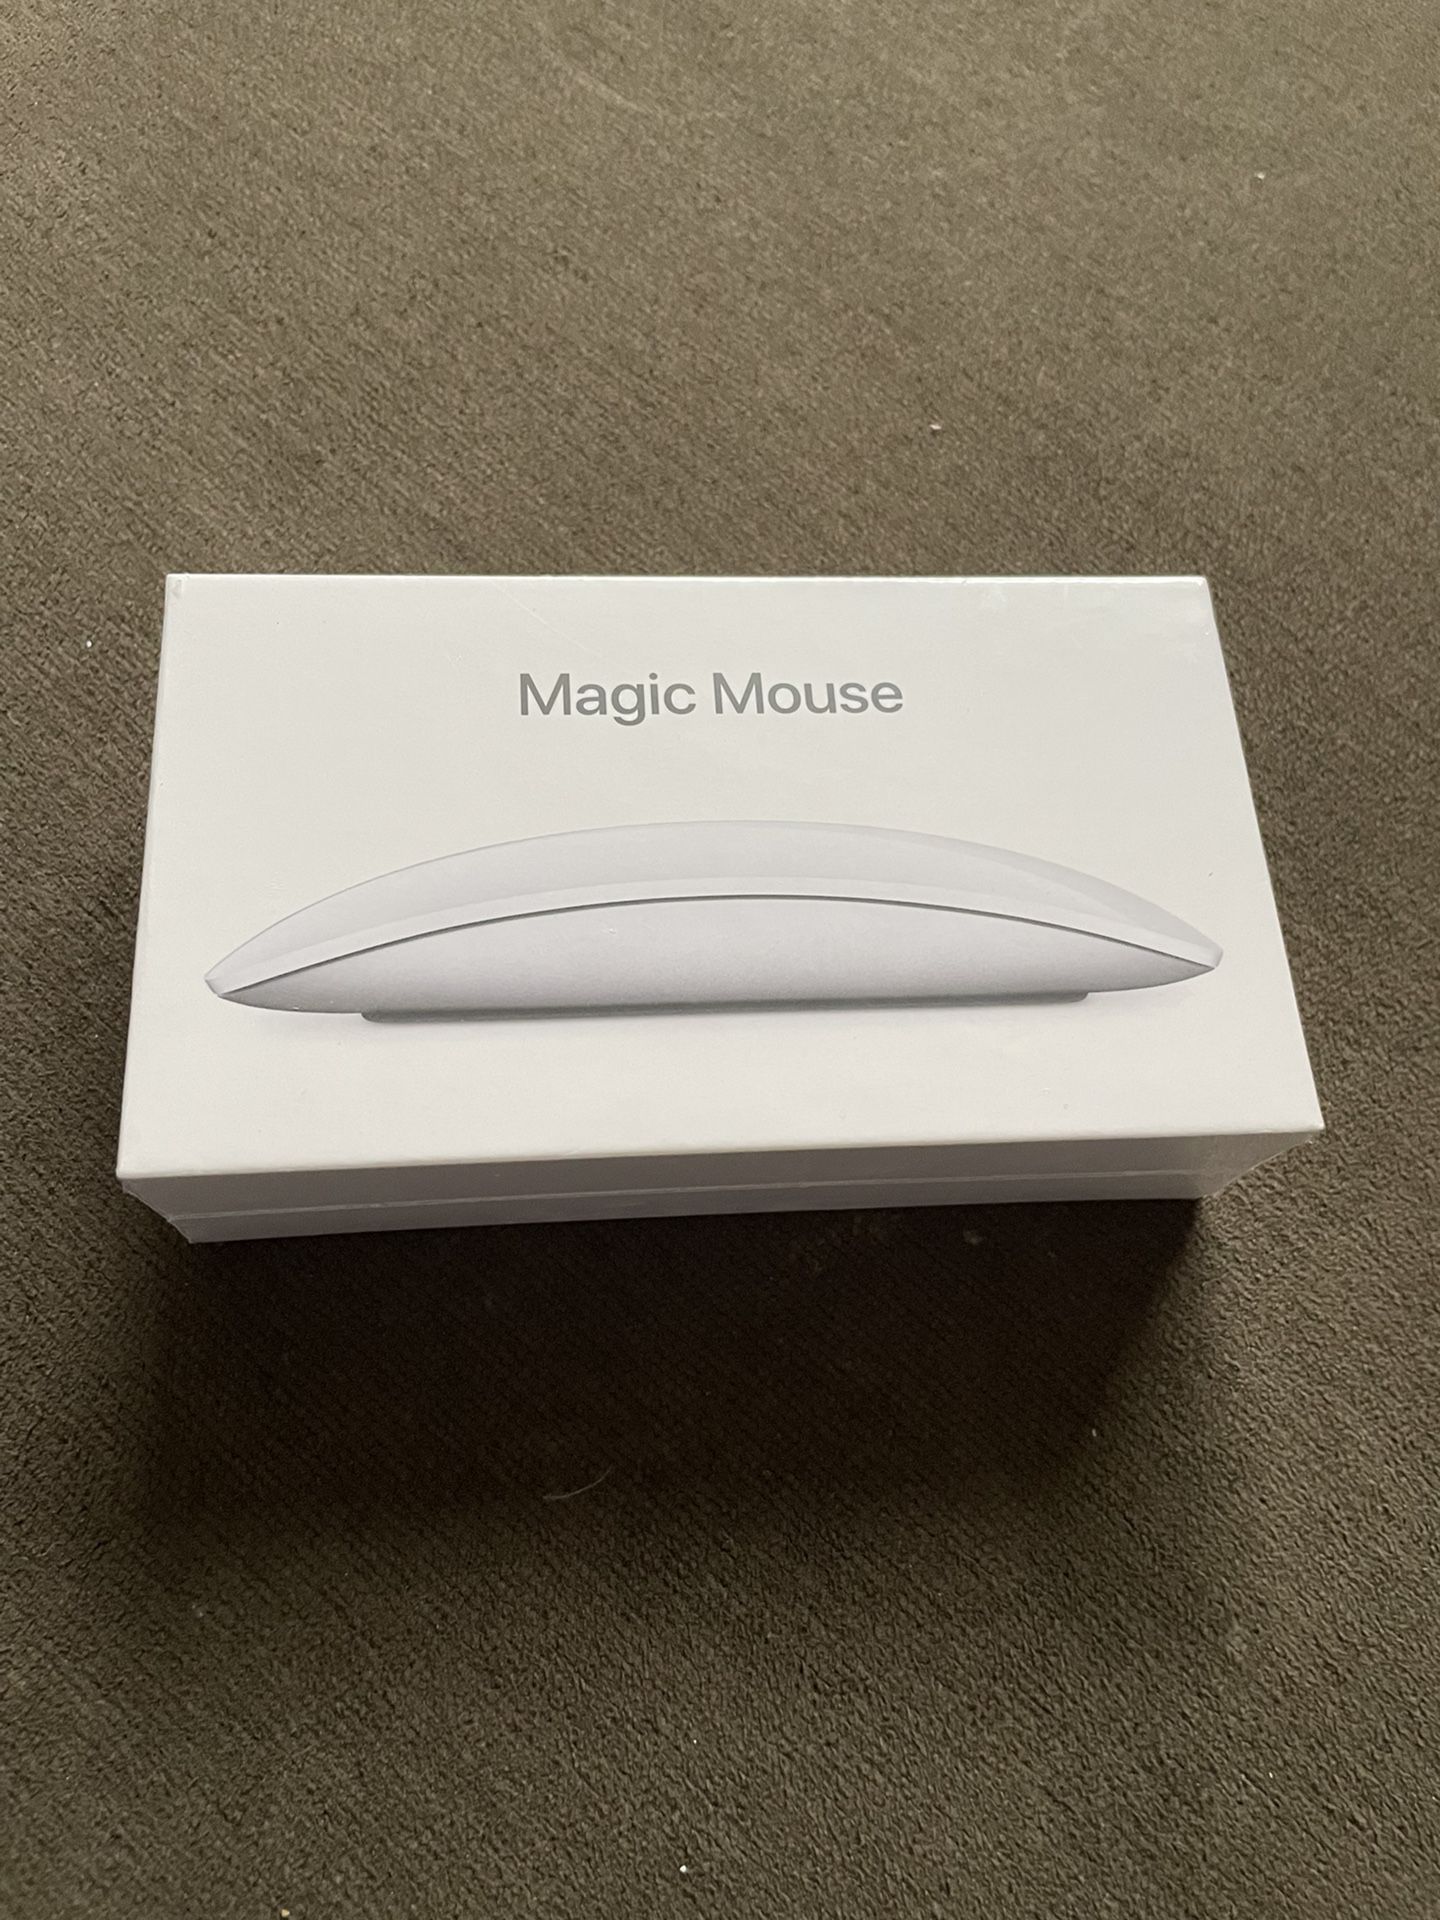 $55 New in box mouse magic tracker Mac wireless Apple iPad iPhone computer work accessories white box Nib Magic mouse Apple accessory I products Store